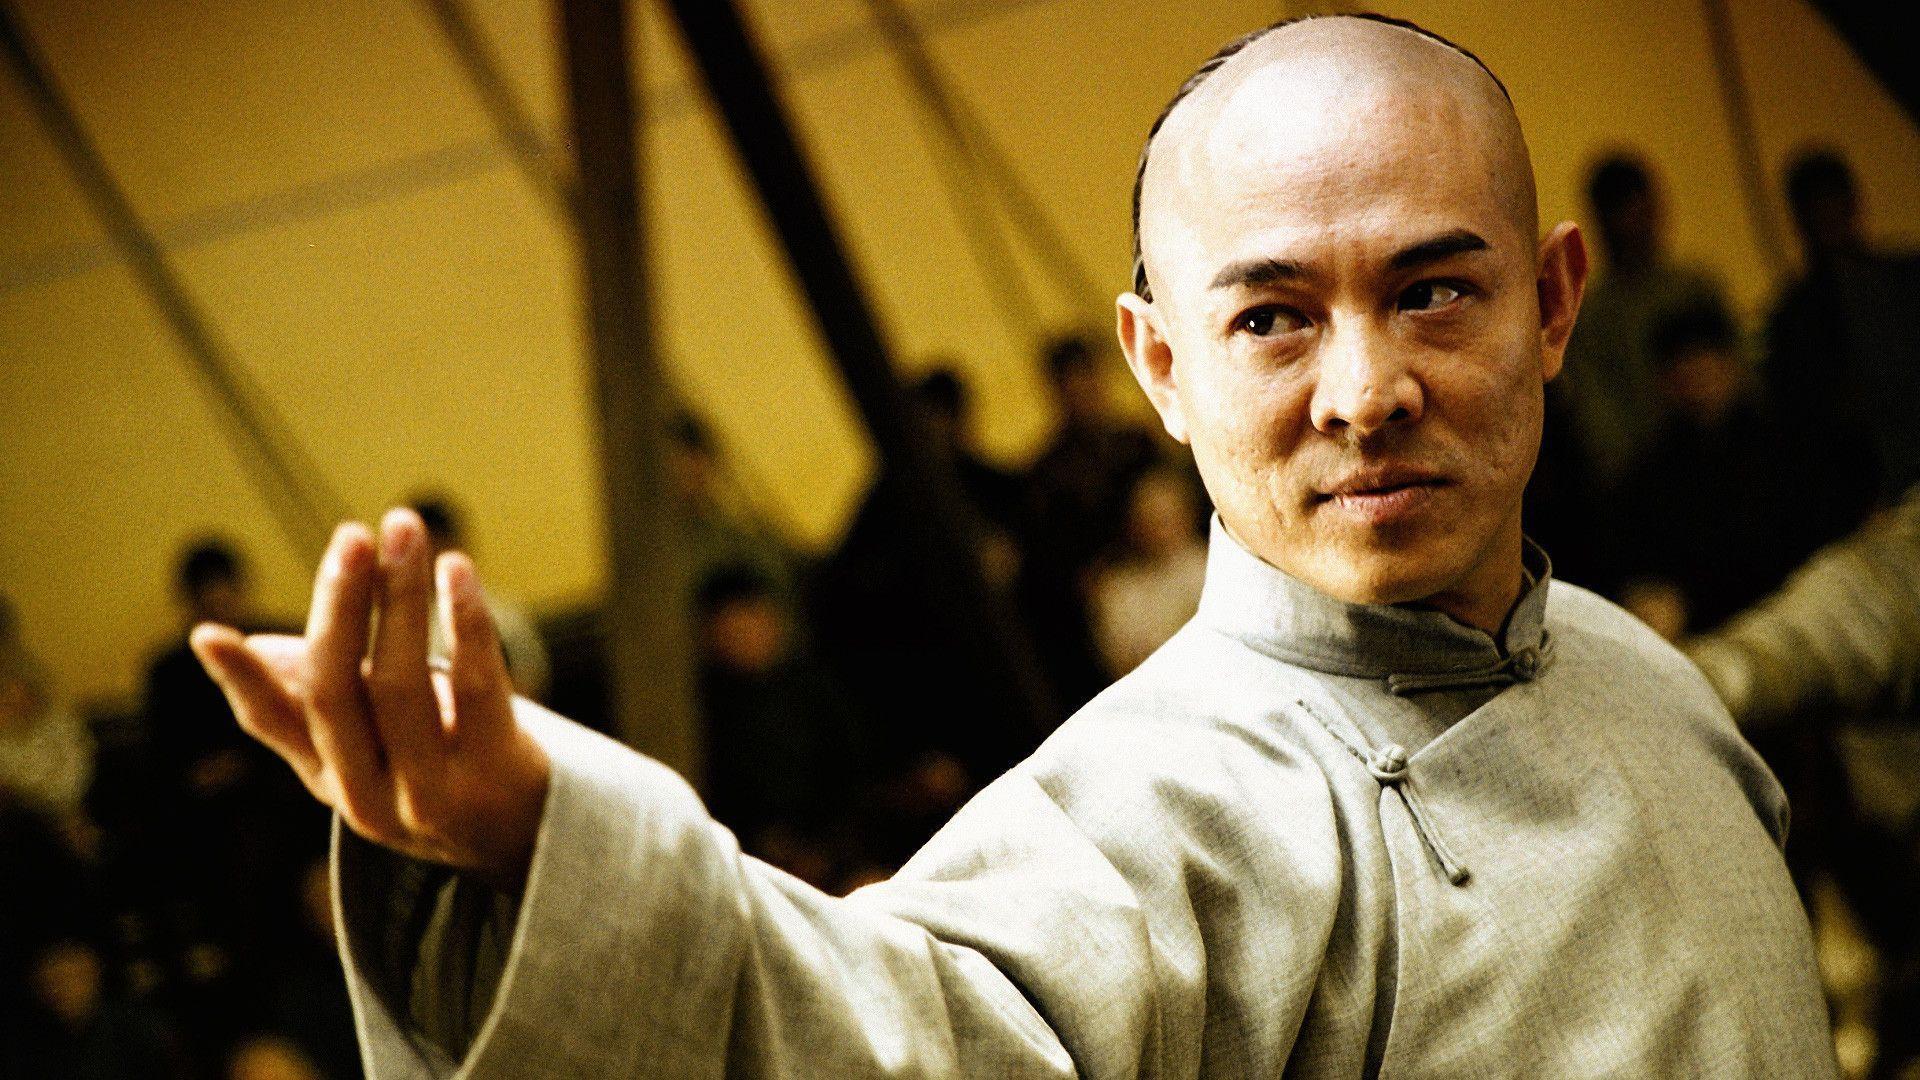 Kung fu master Jet Li wallpaper and image, picture